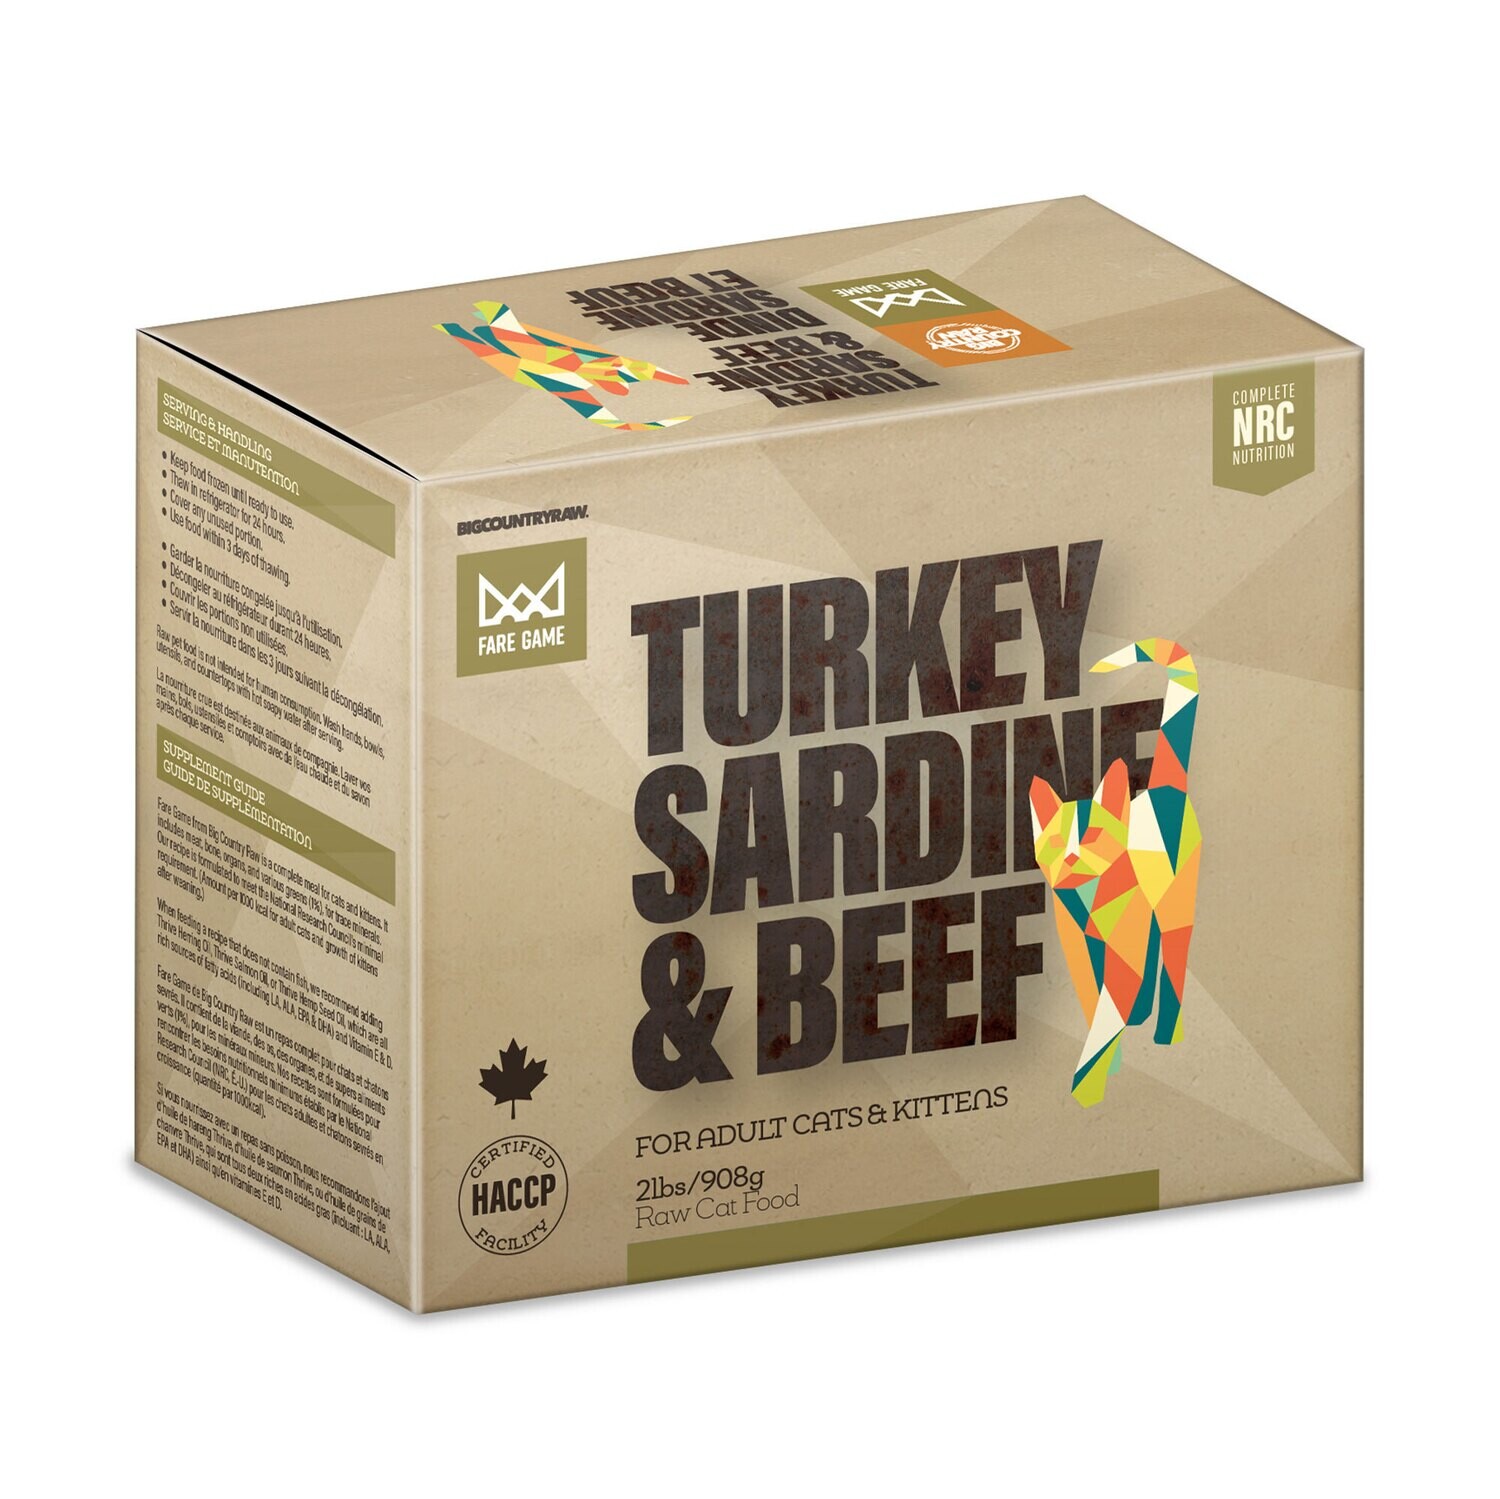 BCR FARE GAME TURKEY & SARDINES WITH BEEF 2LB